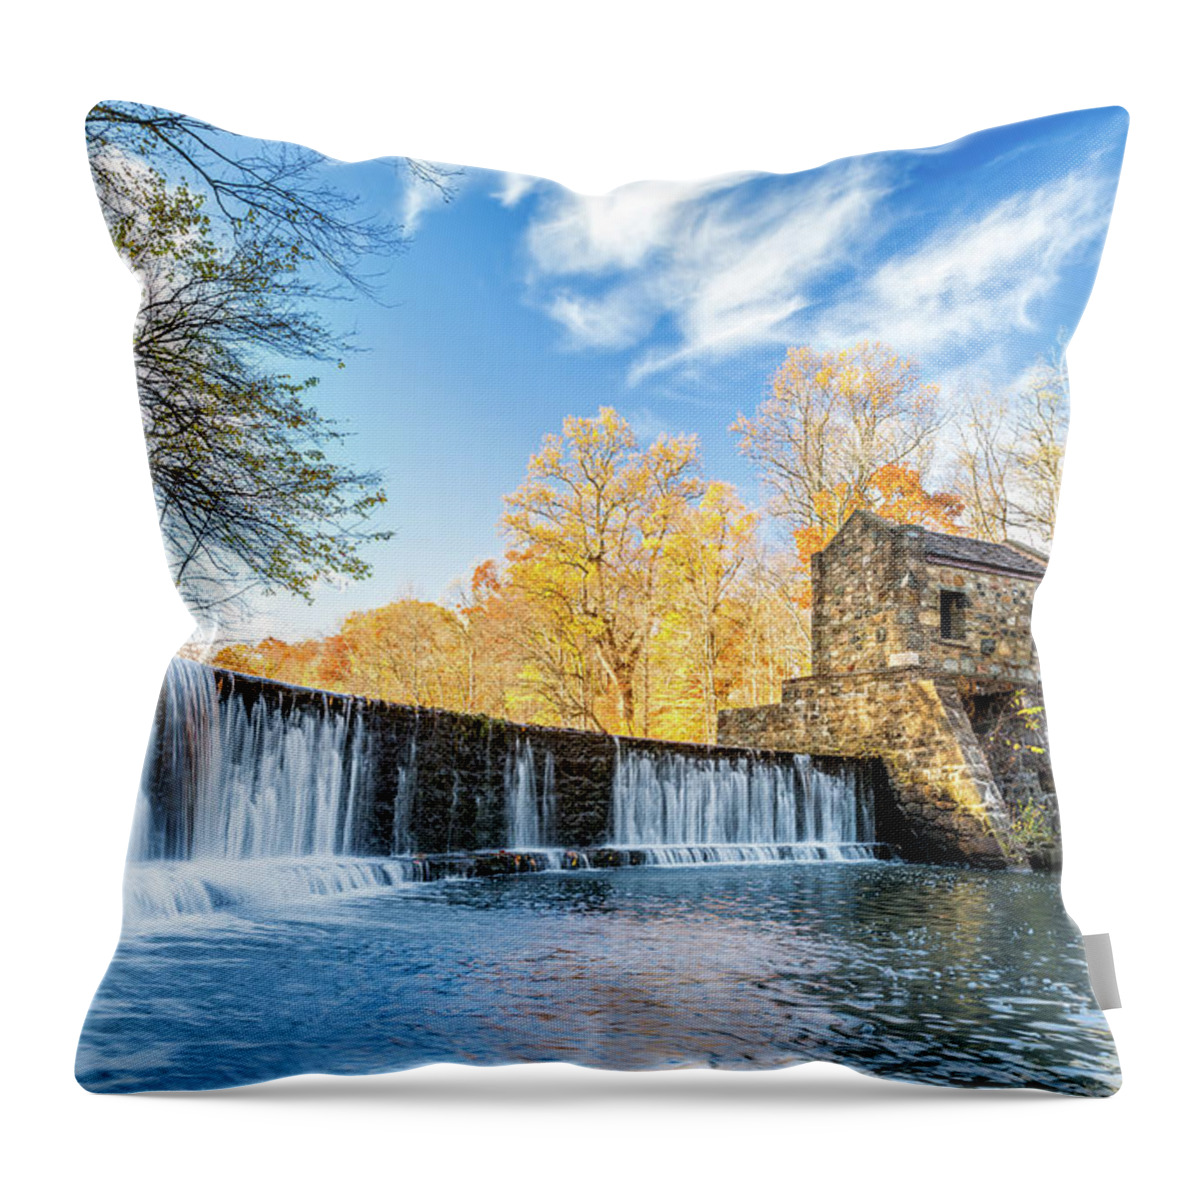 Afternoon Throw Pillow featuring the photograph Speedwell dam waterfall by Mihai Andritoiu